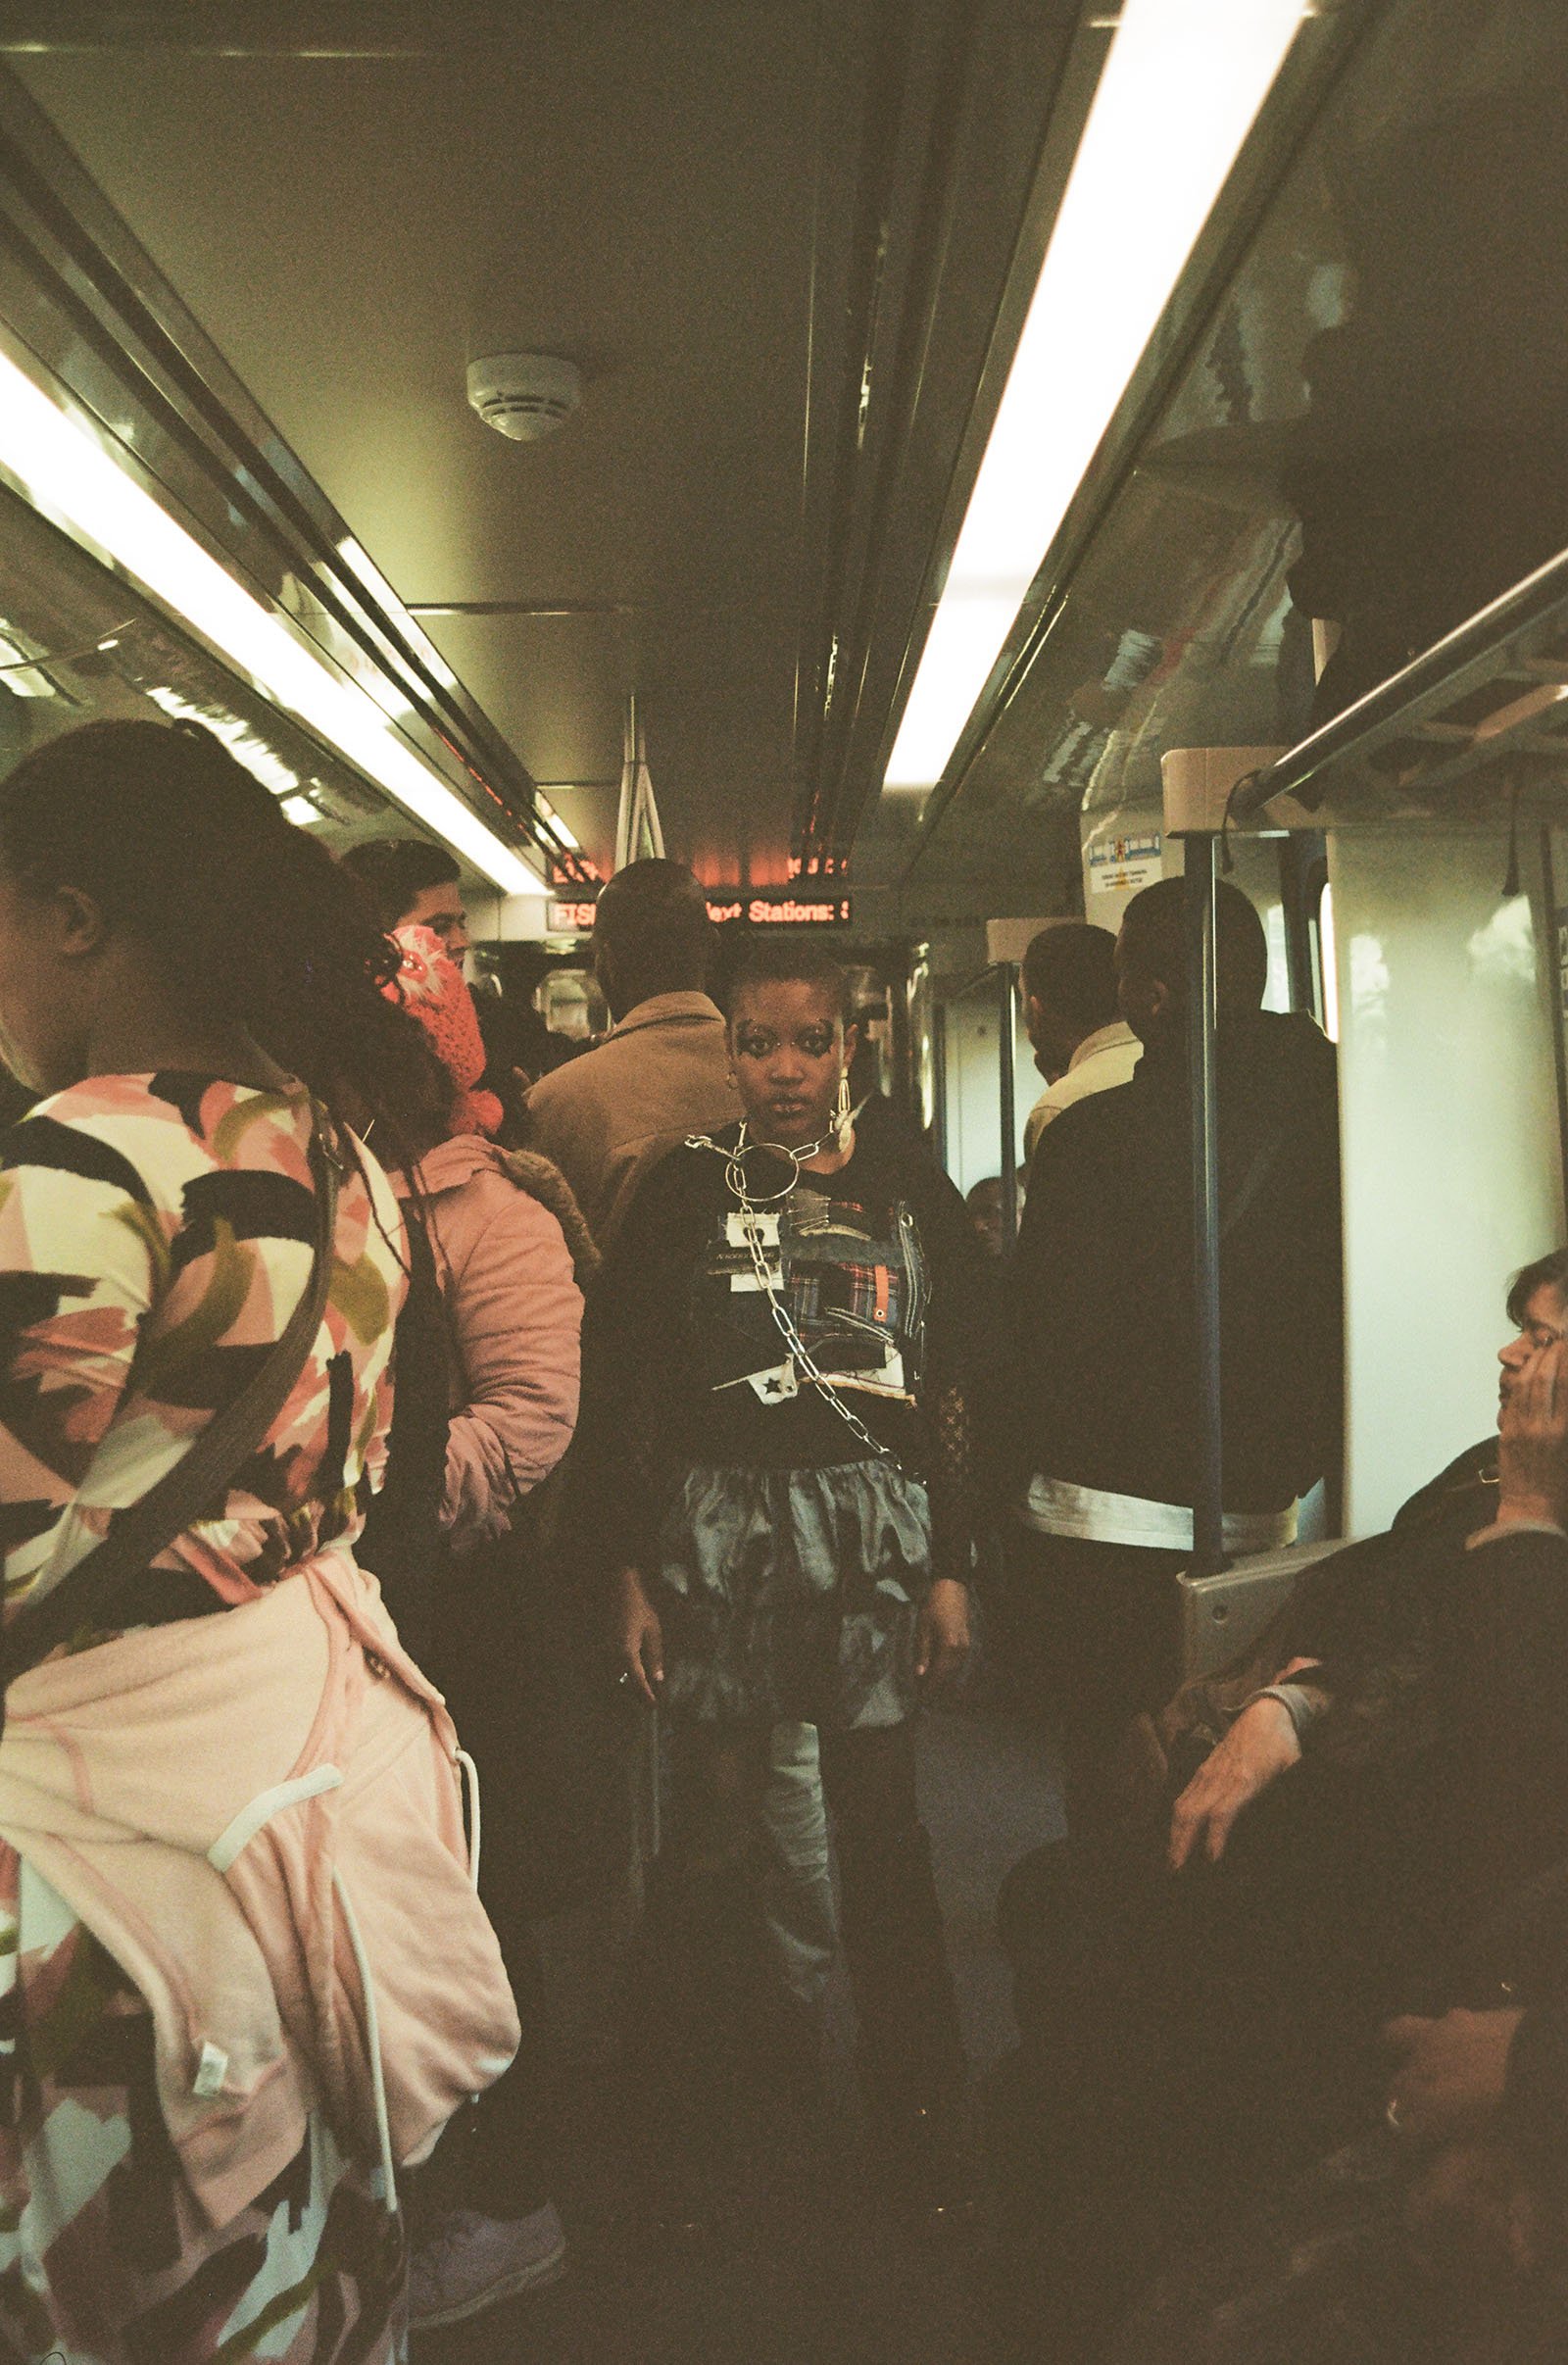 A woman poses amid a crowd of people on a busy train.